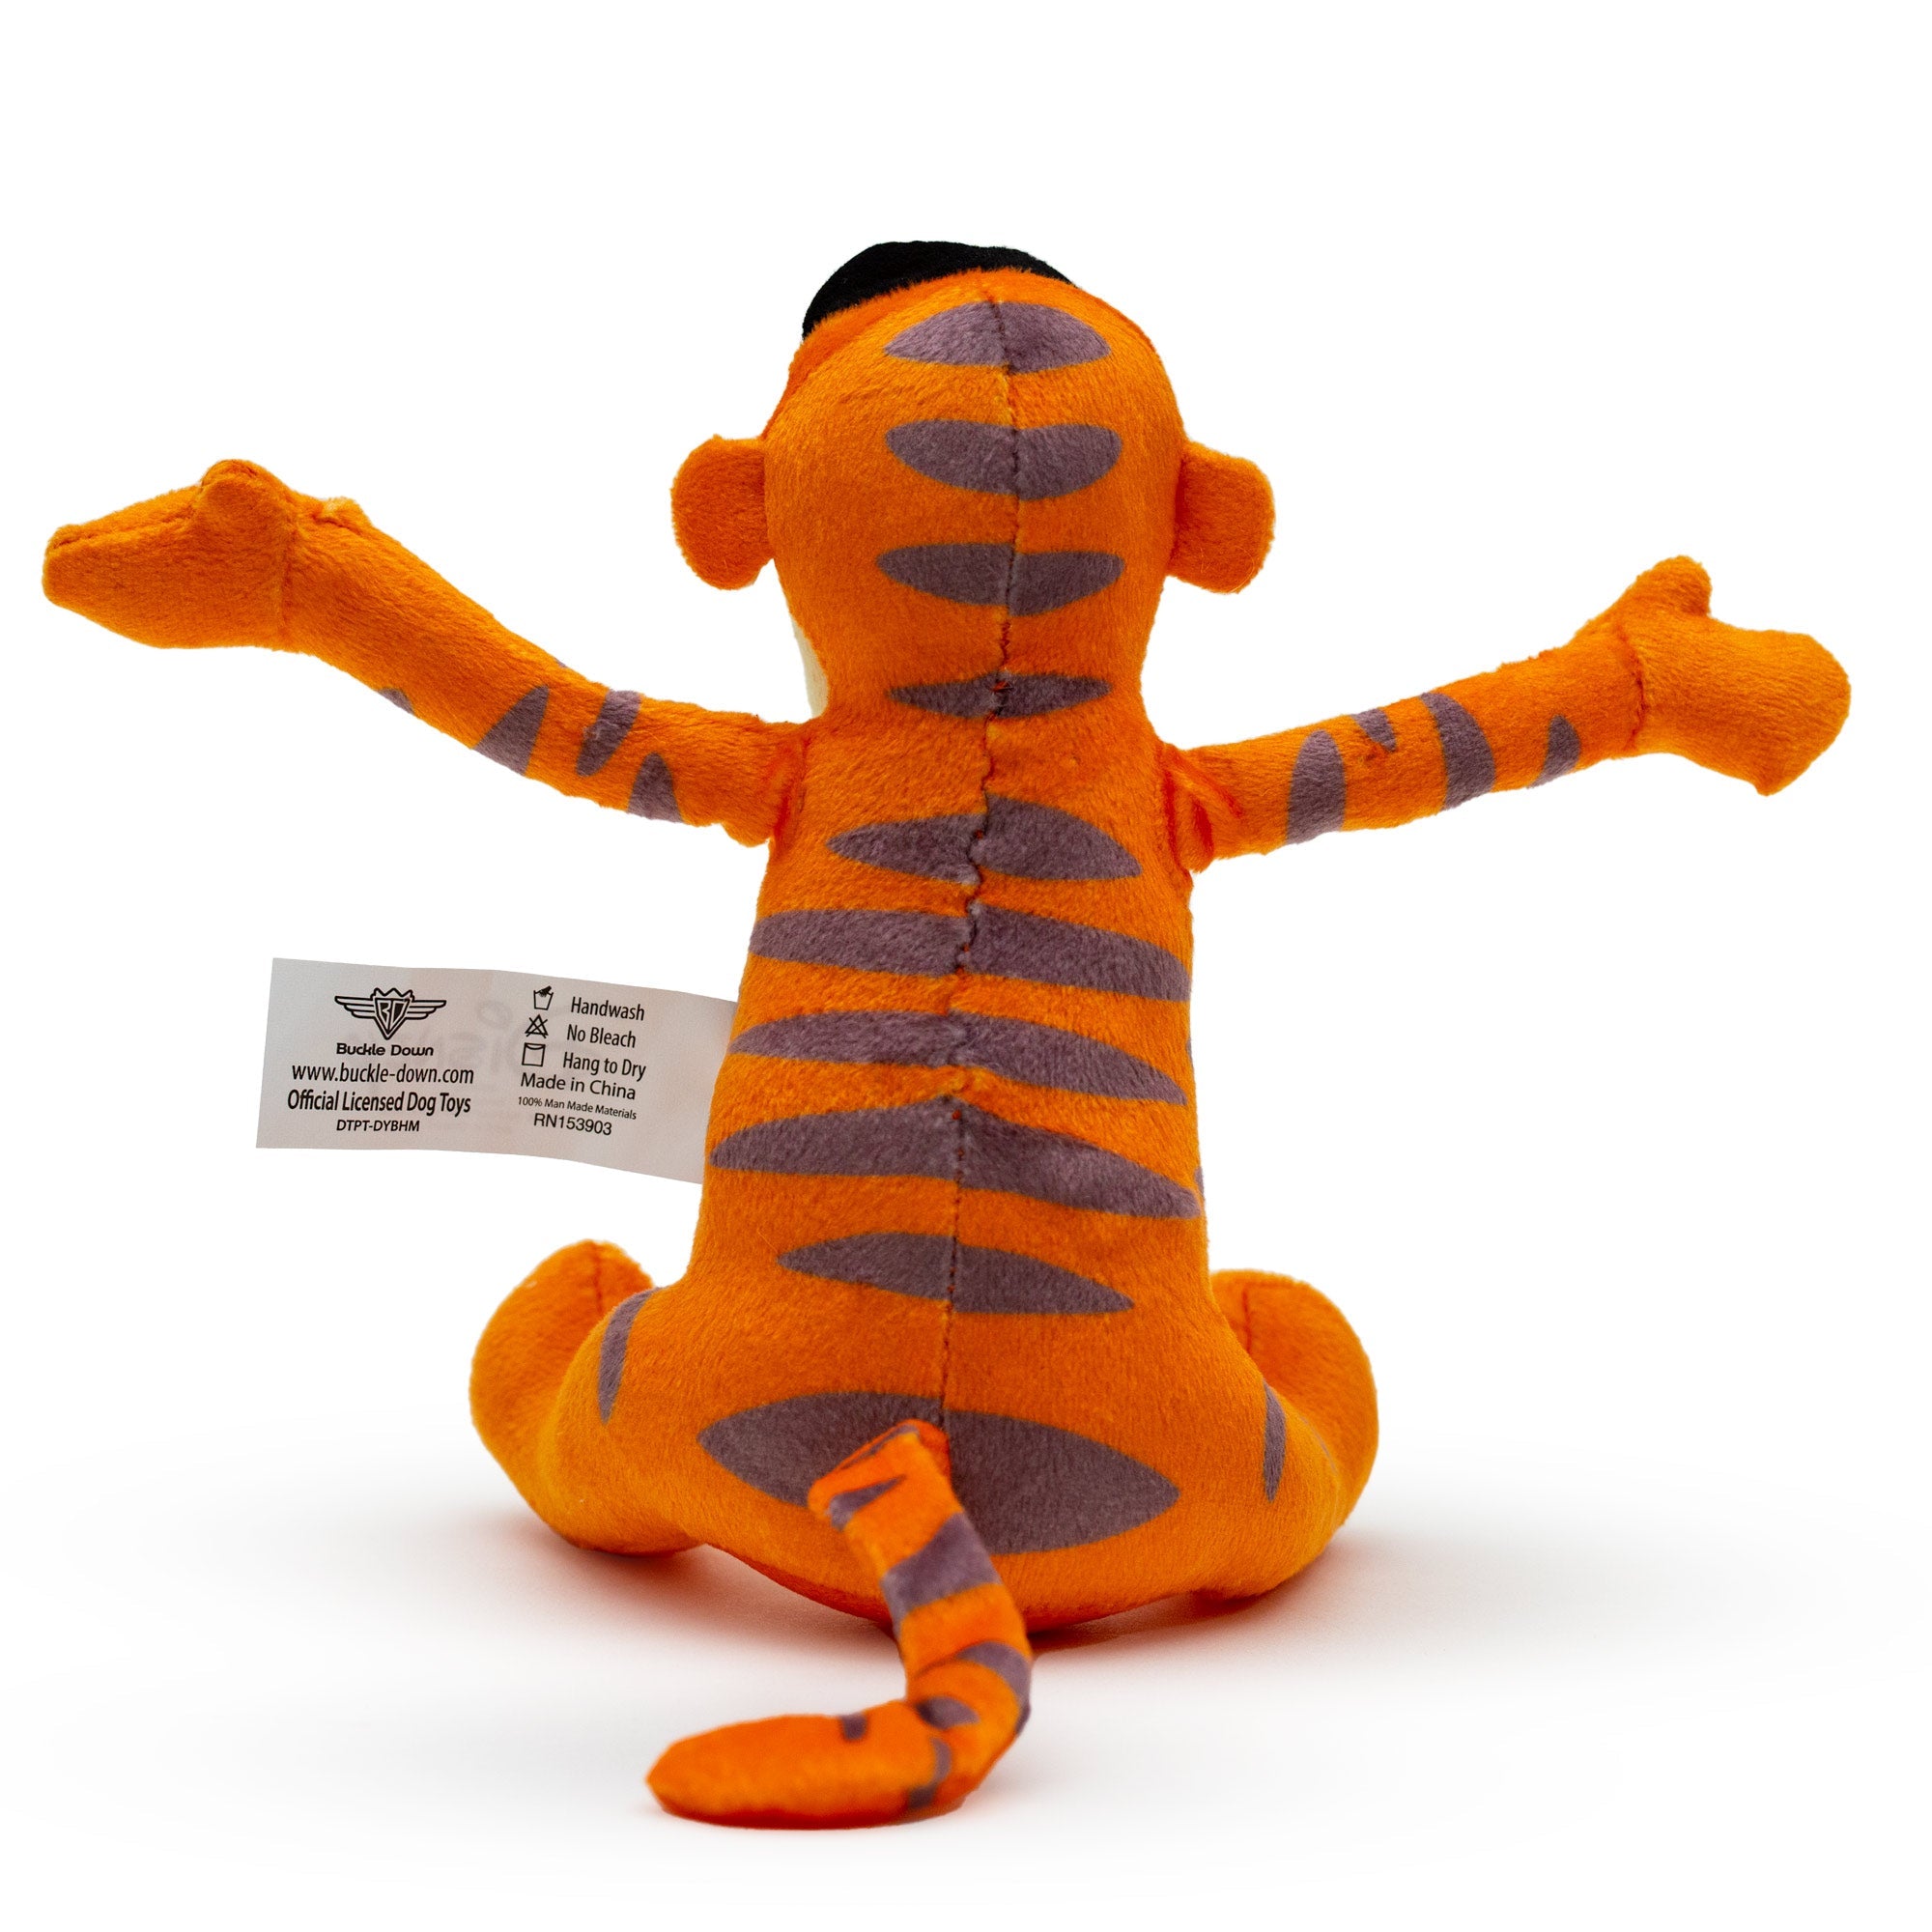 Dog Toy Squeaker Plush - Winnie the Pooh Tiggers Arms Up Sitting Pose